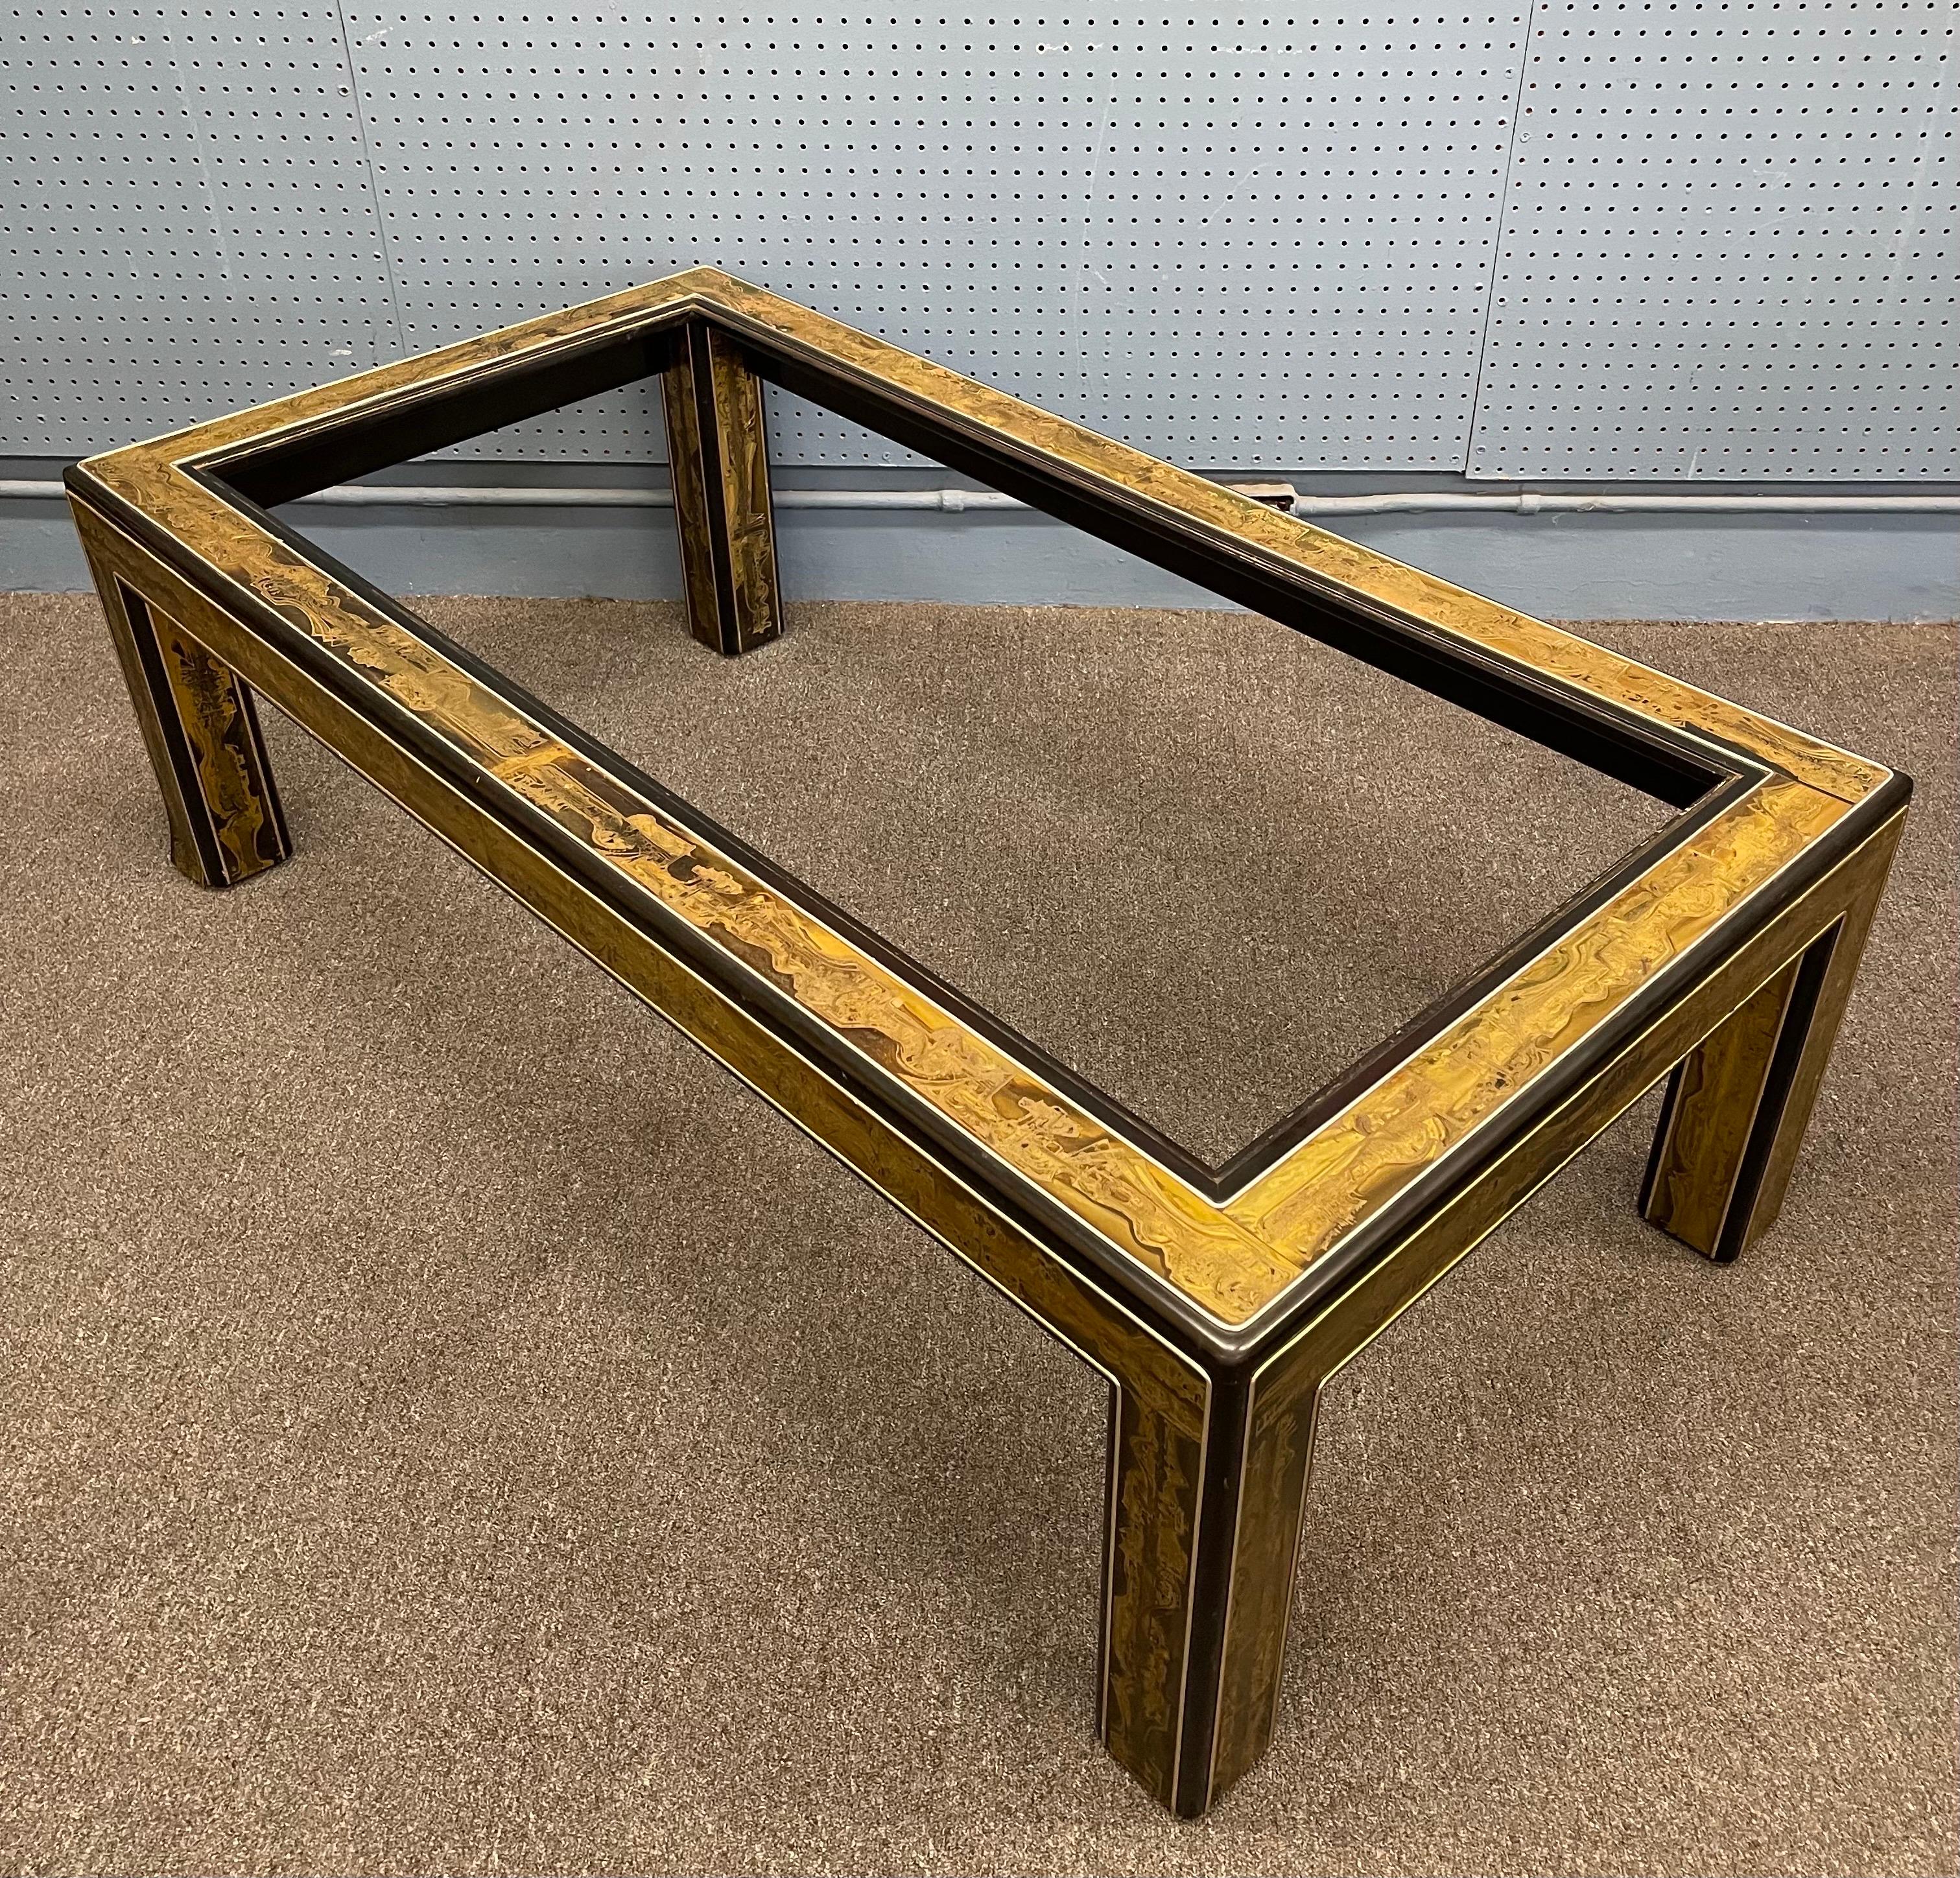 20th Century Acid-Etched Brass with Ebony Lacquer Coffee Table by Bernhard Rohne Mastercraft For Sale